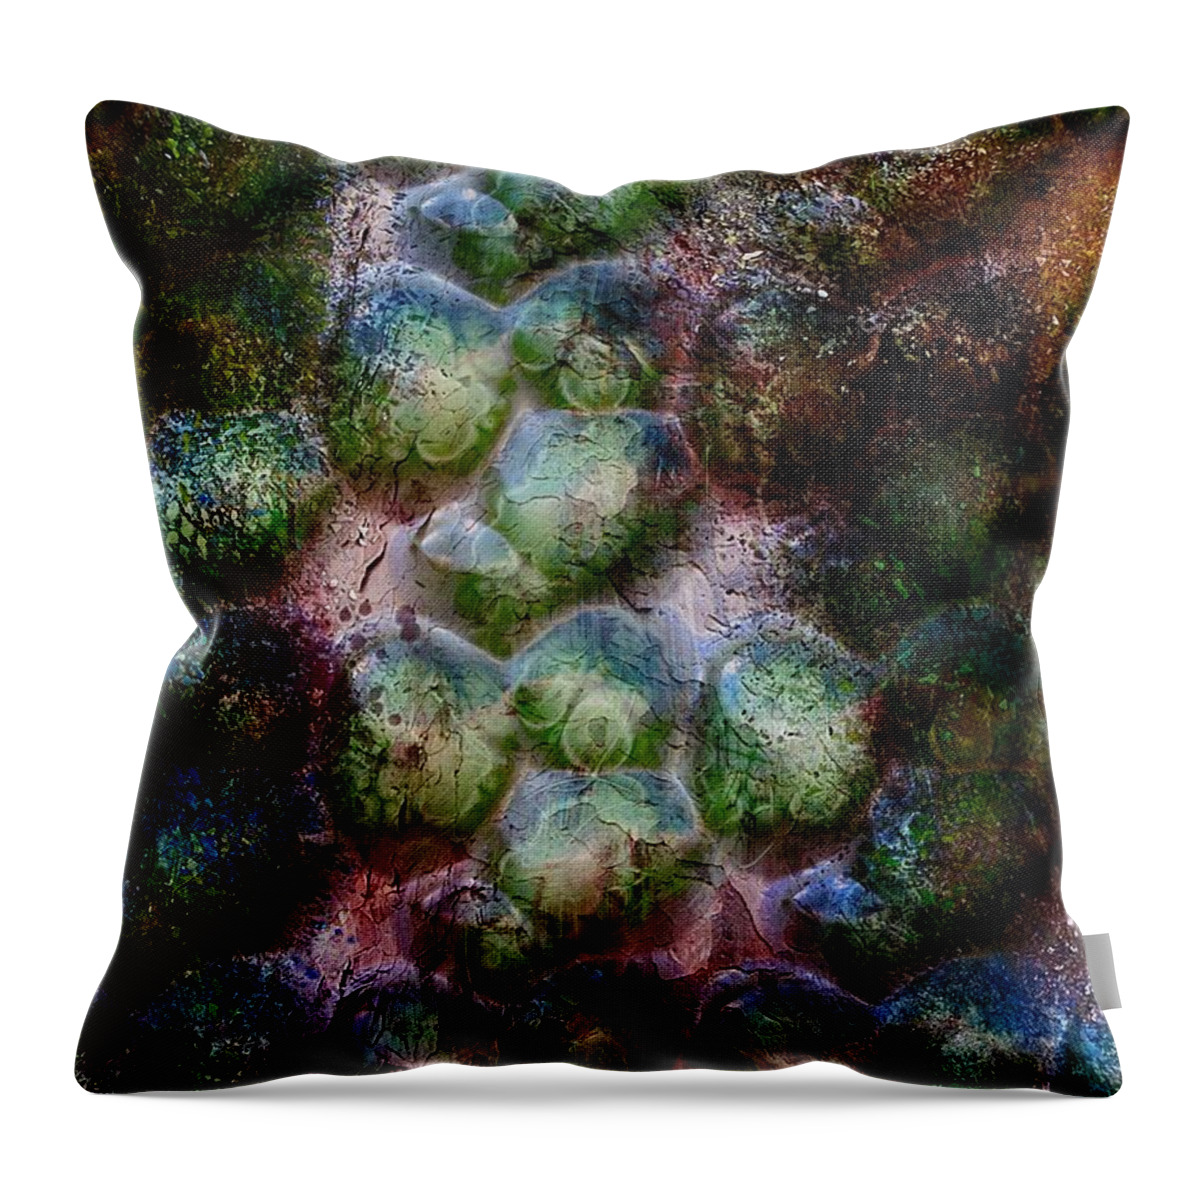 Seasonsseasons Of A Tree Throw Pillow featuring the painting All That Glistens by Mark Taylor